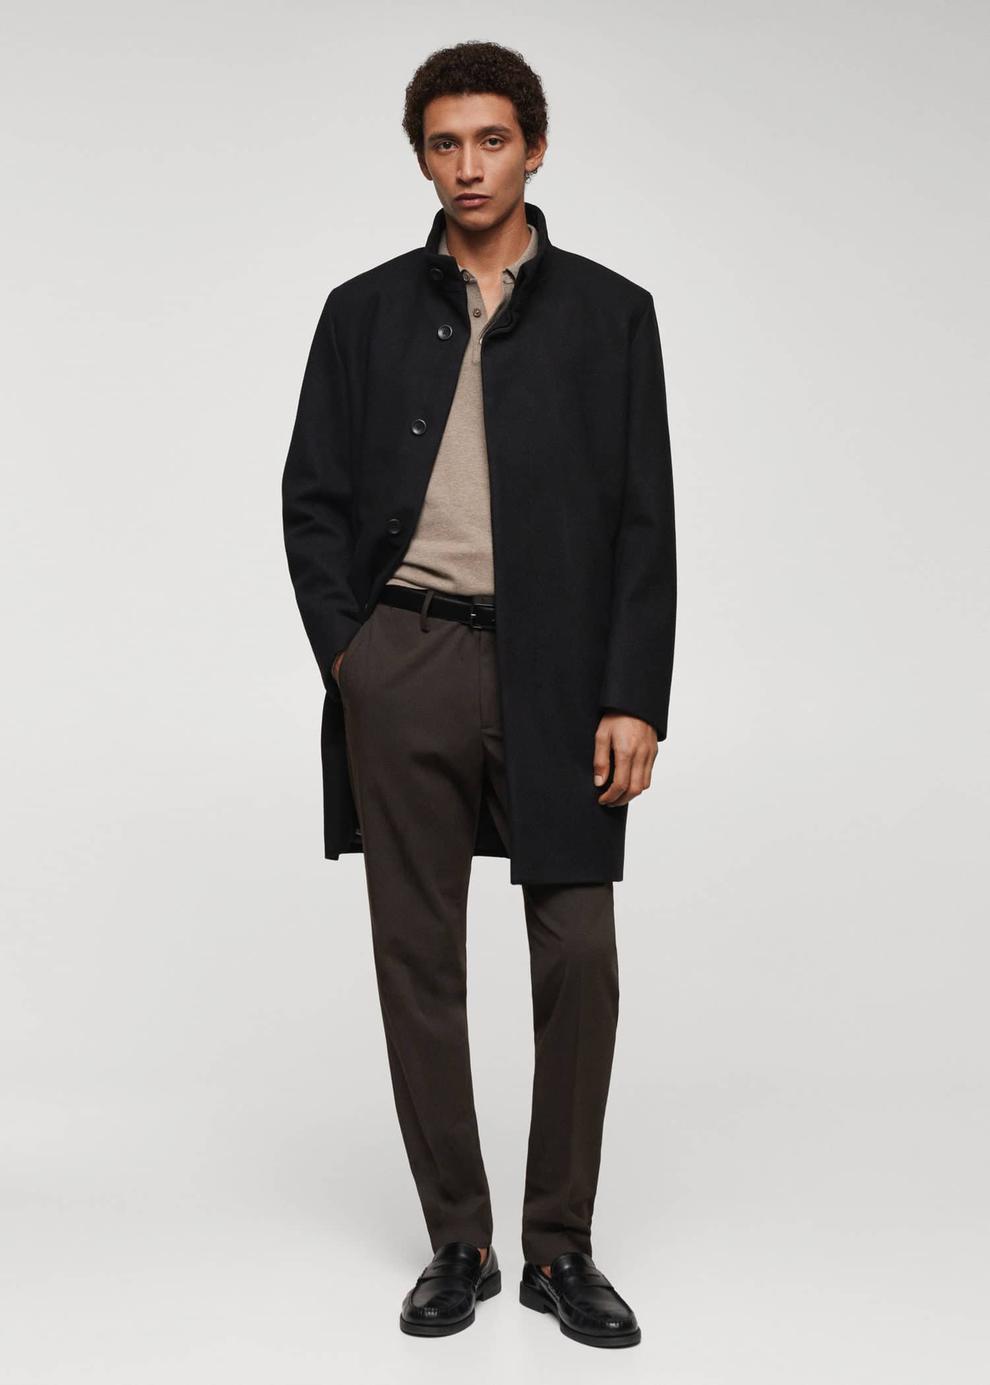 Wool funnel neck coat offers at S$ 199.9 in HE by Mango